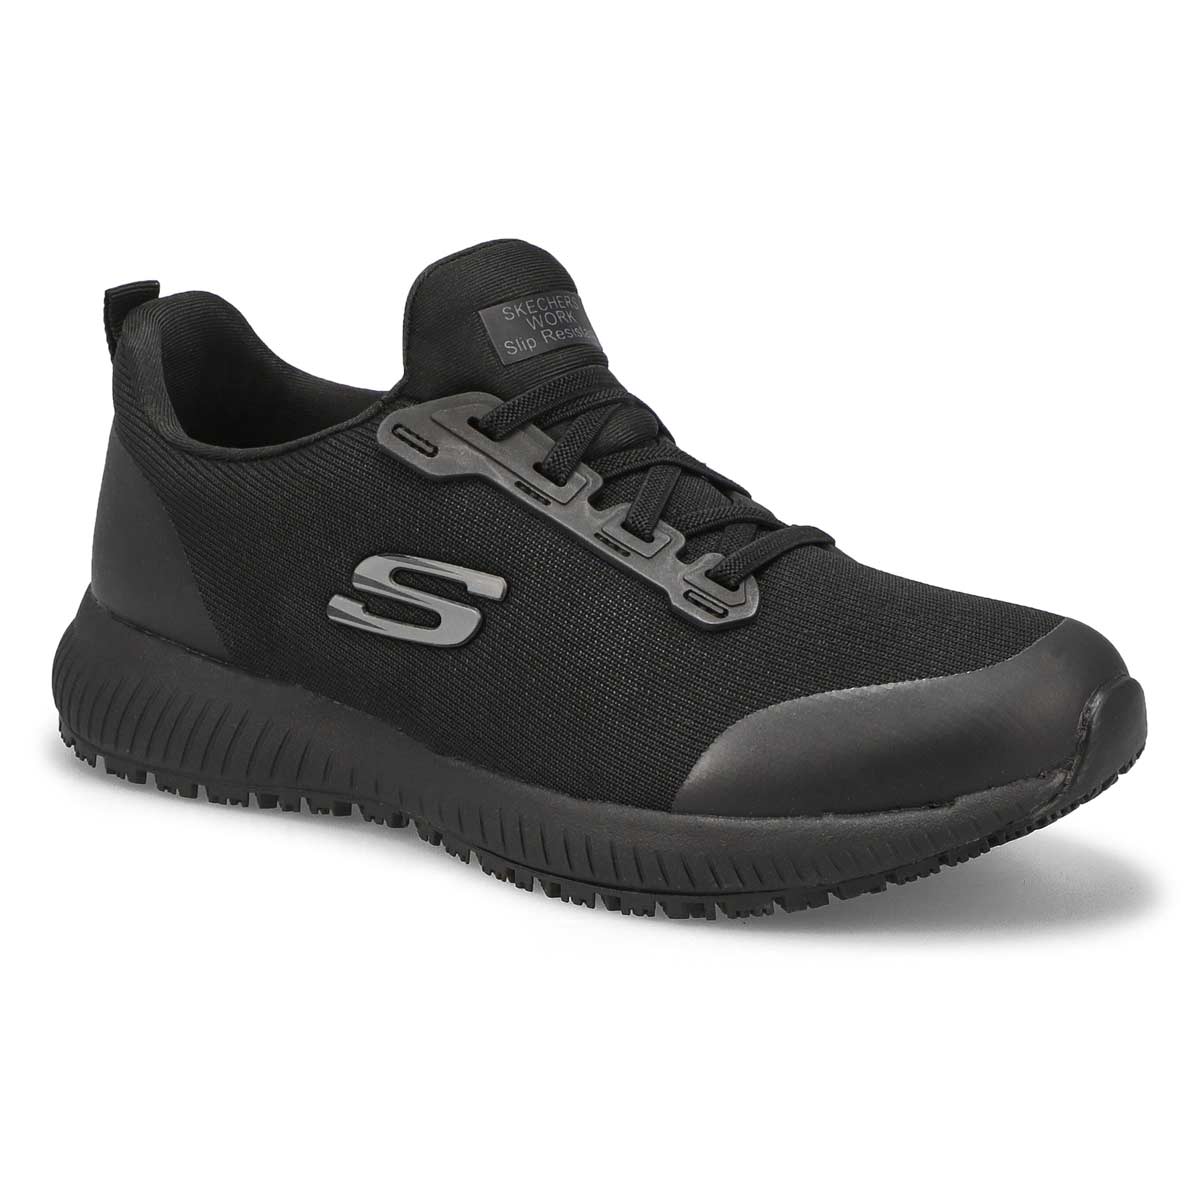 Skechers Shoes, Sandals, Boots, Non slip for Mens and Womens